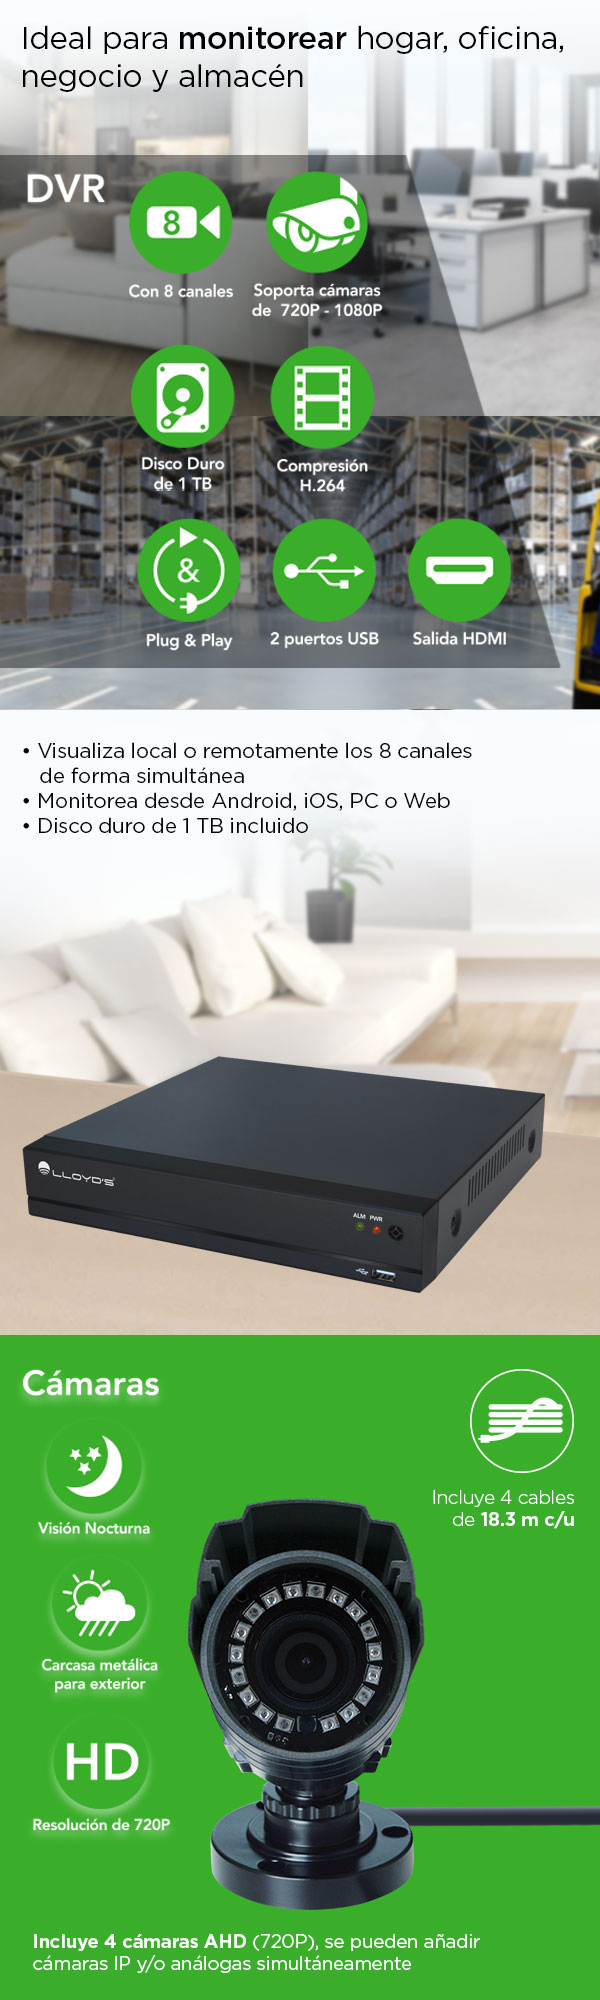 DVR 720P 8 CANALES LC-1138